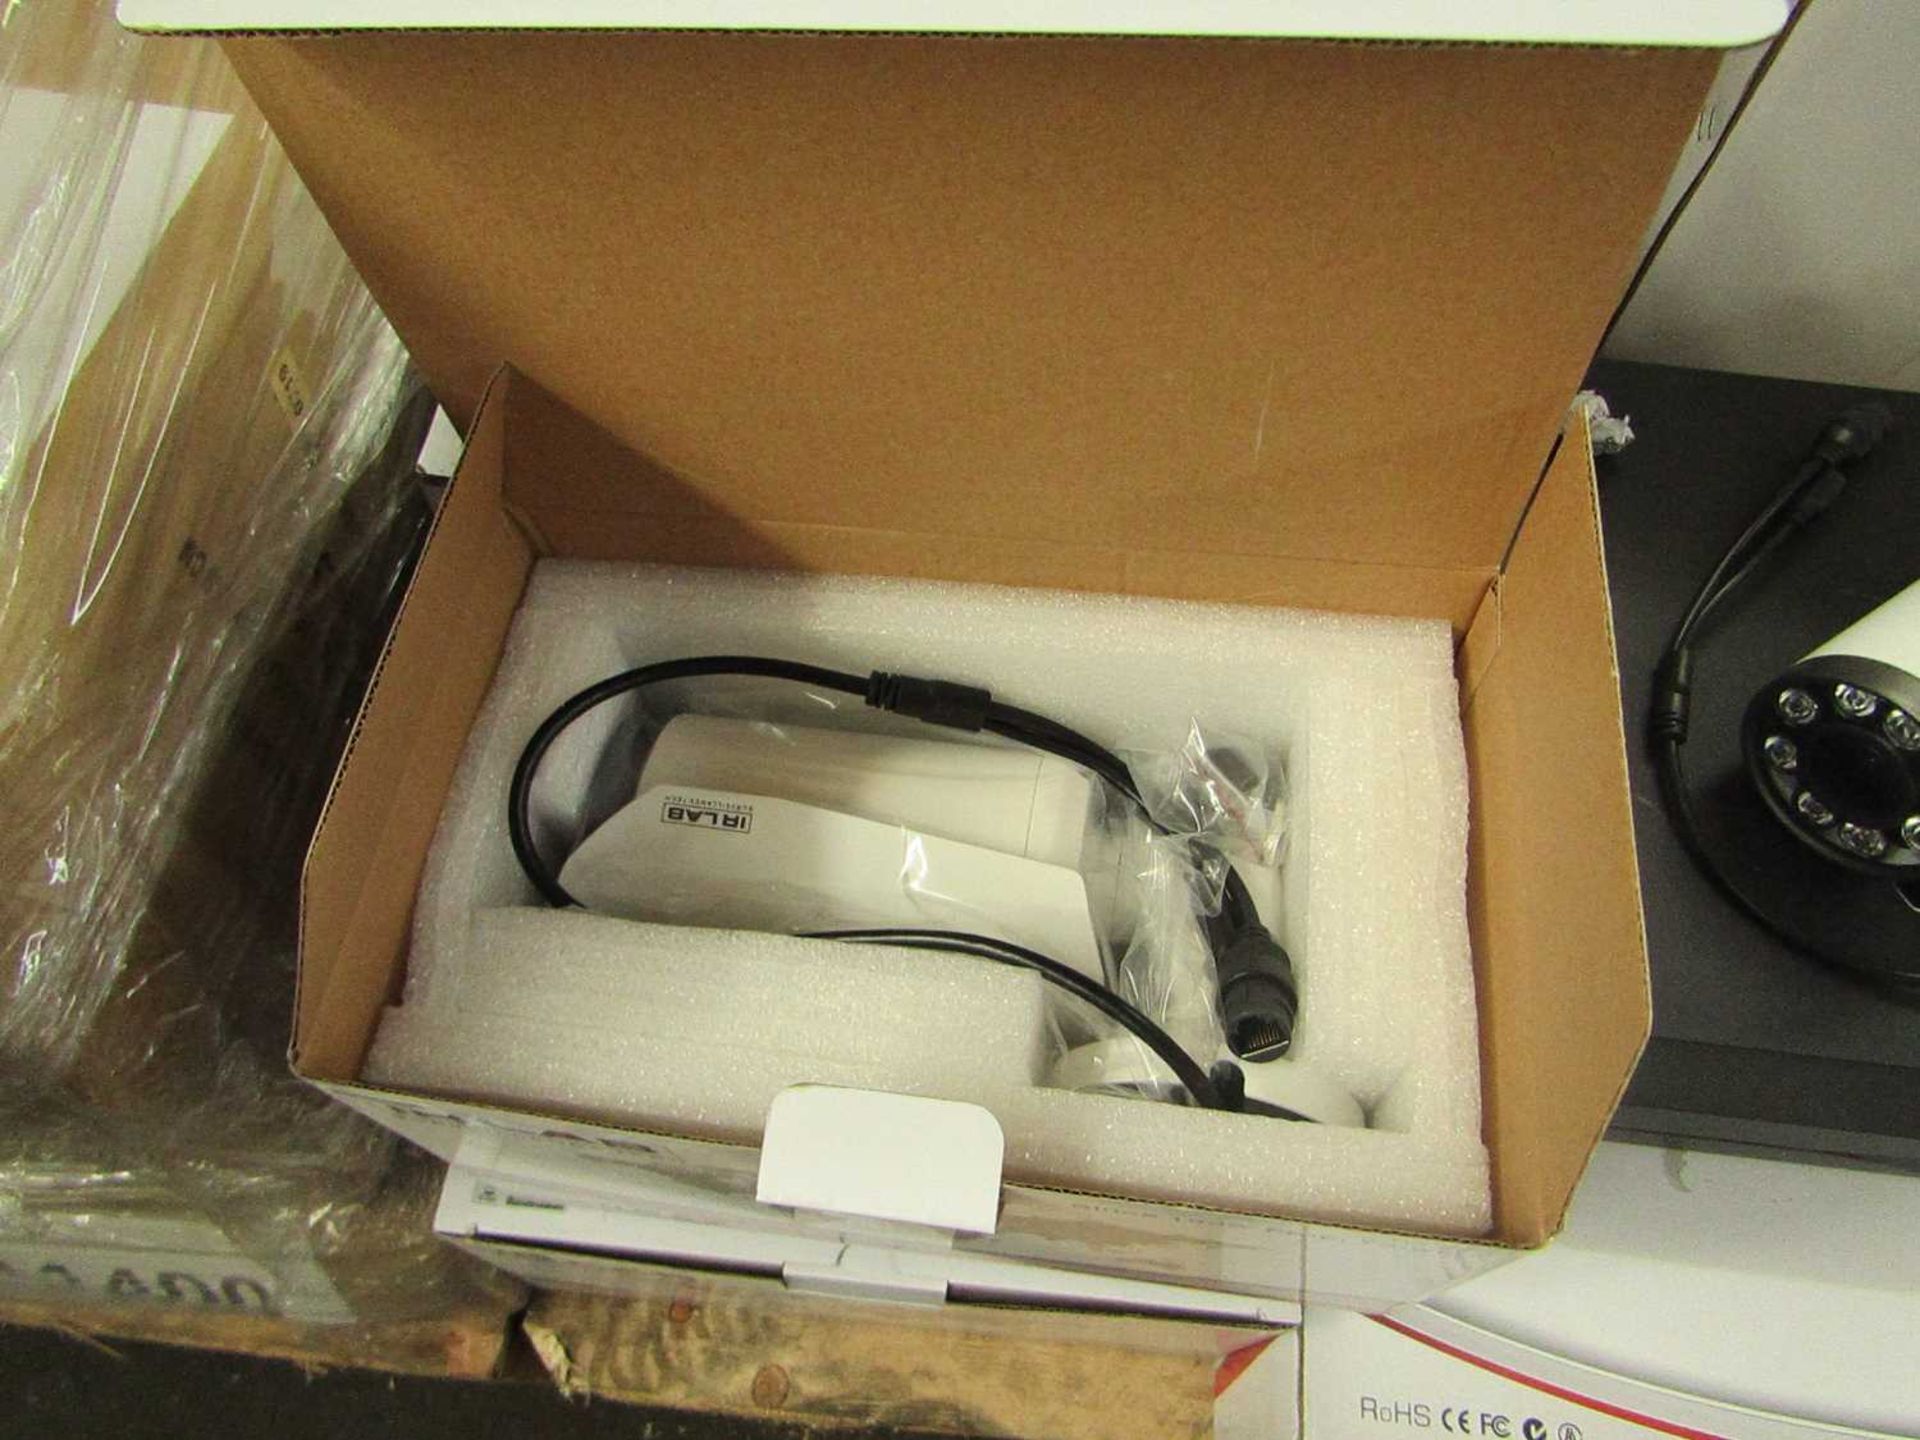 VAT IRLAB CIR-HDR26NEC IR Network Camera. Tested working and boxed.